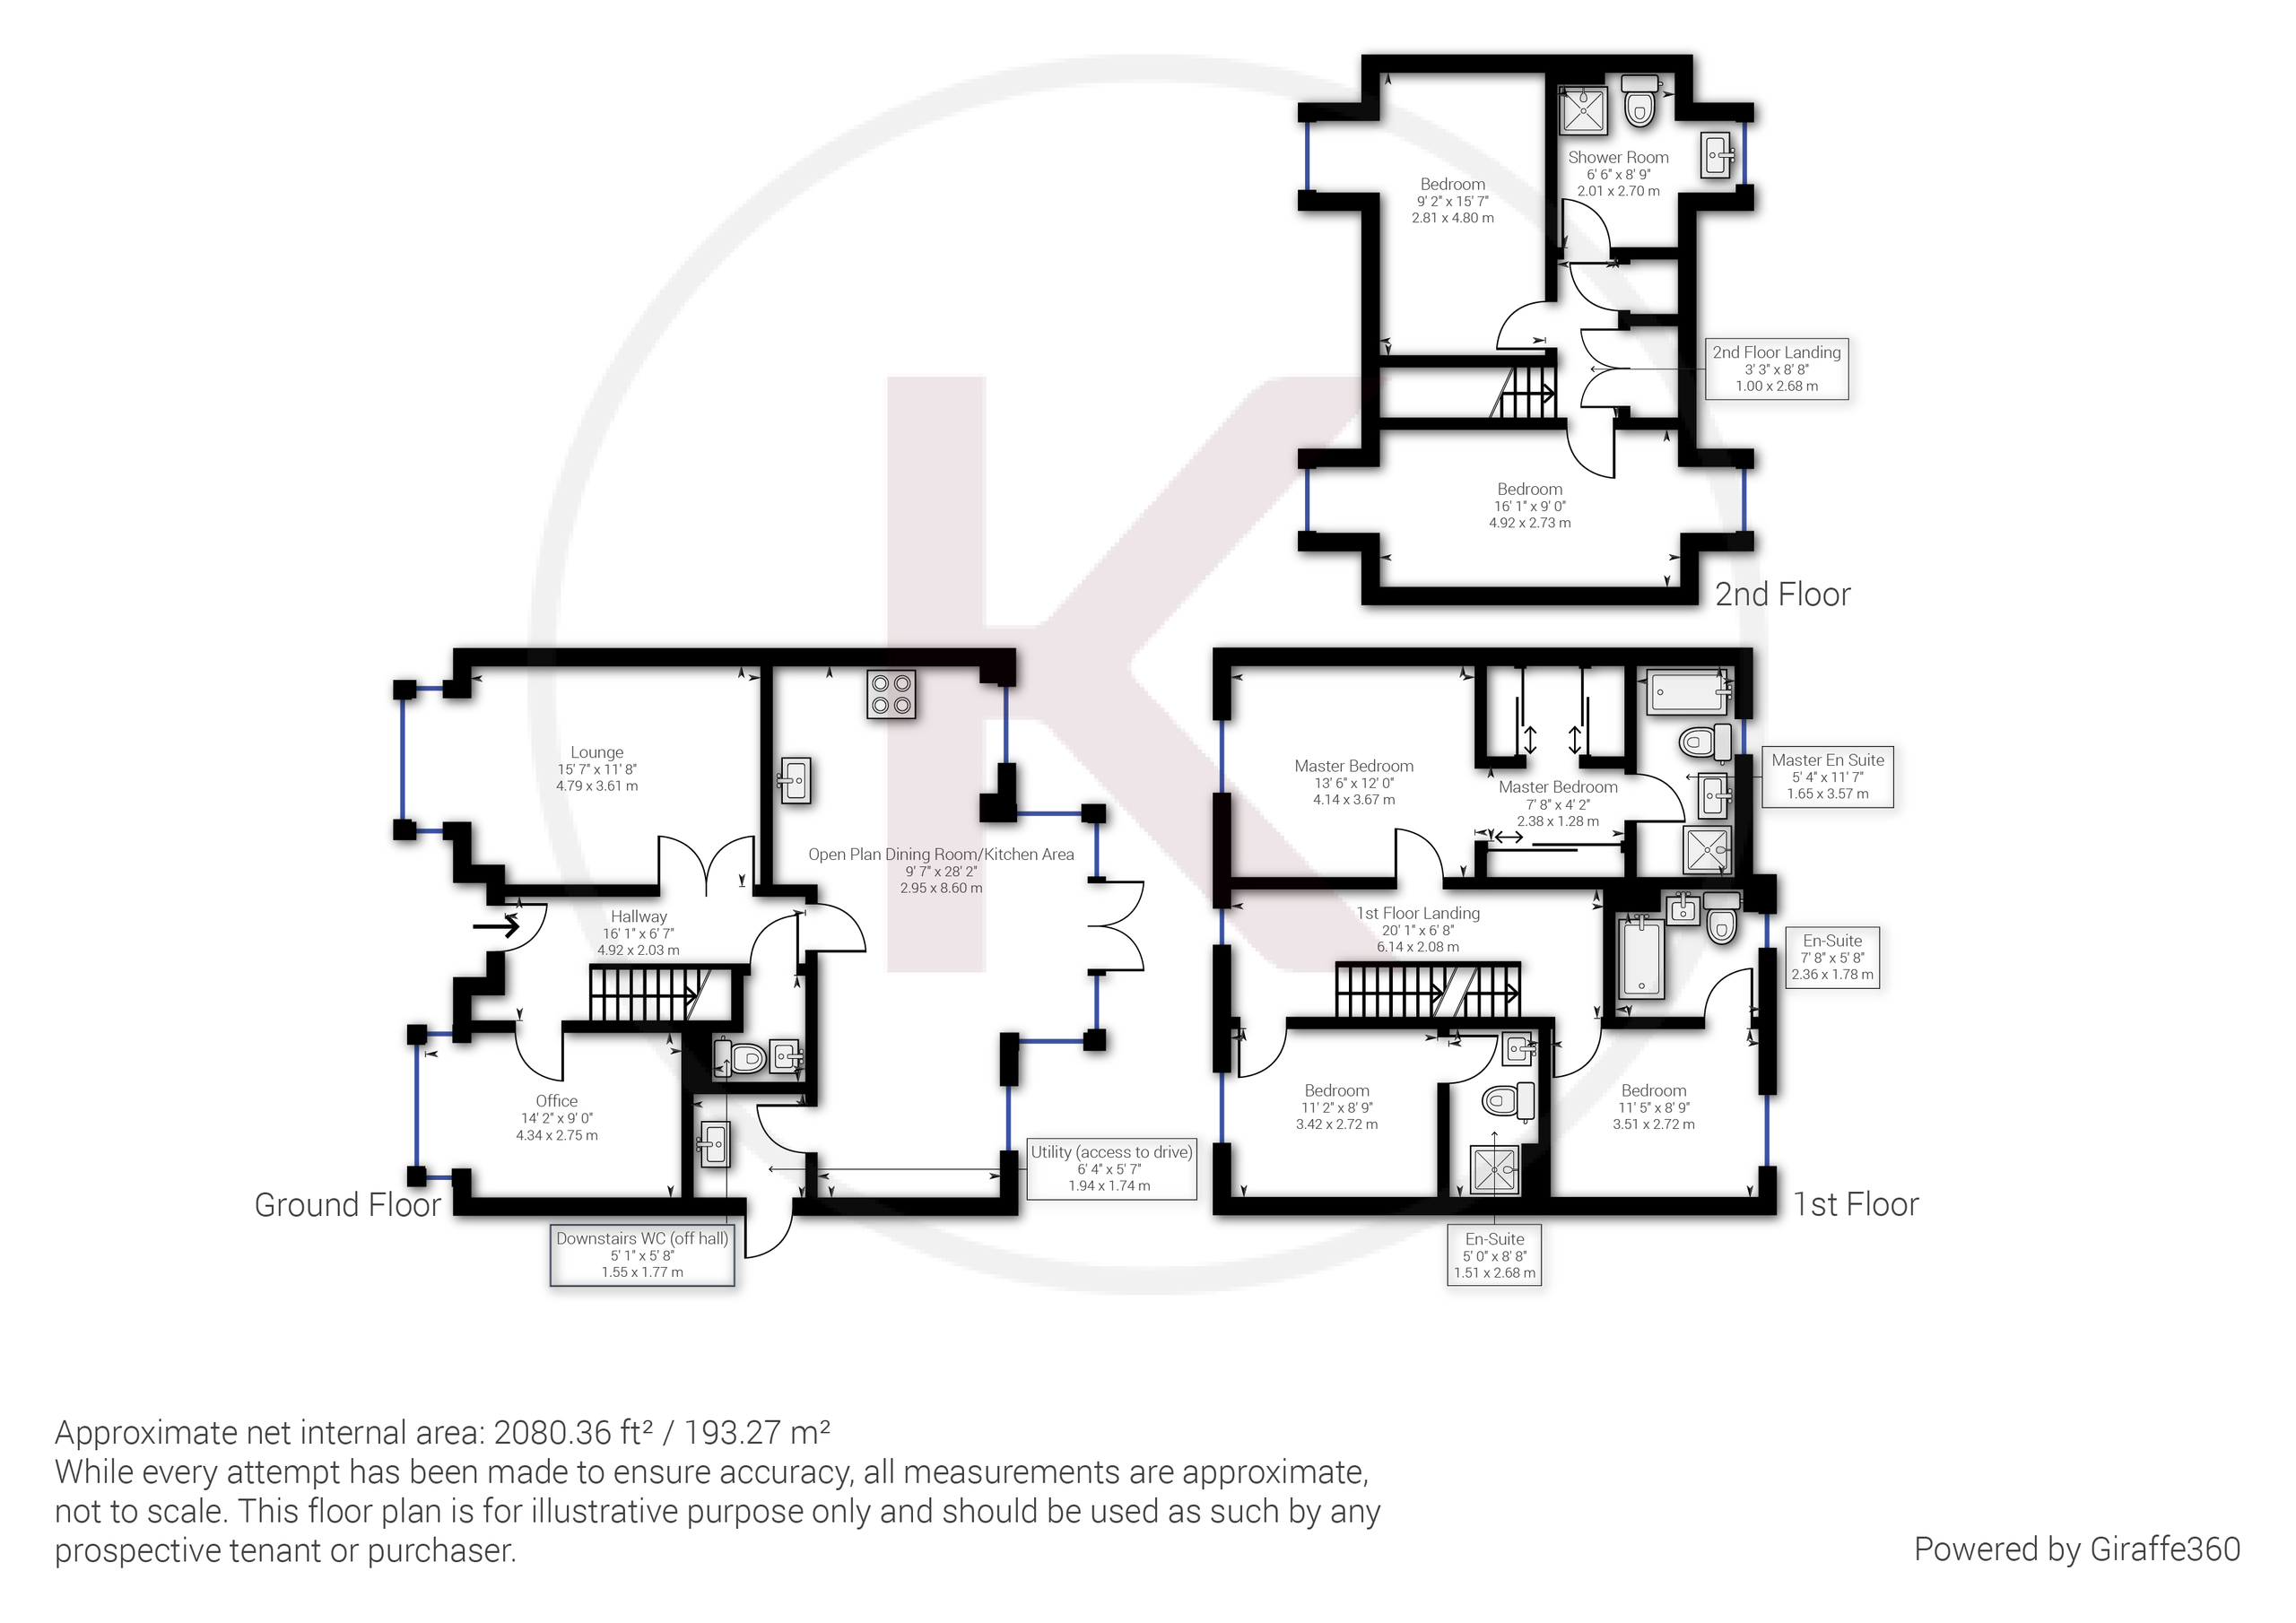 5 bed detached house to rent in Sierra Road, High Wycombe - Property floorplan